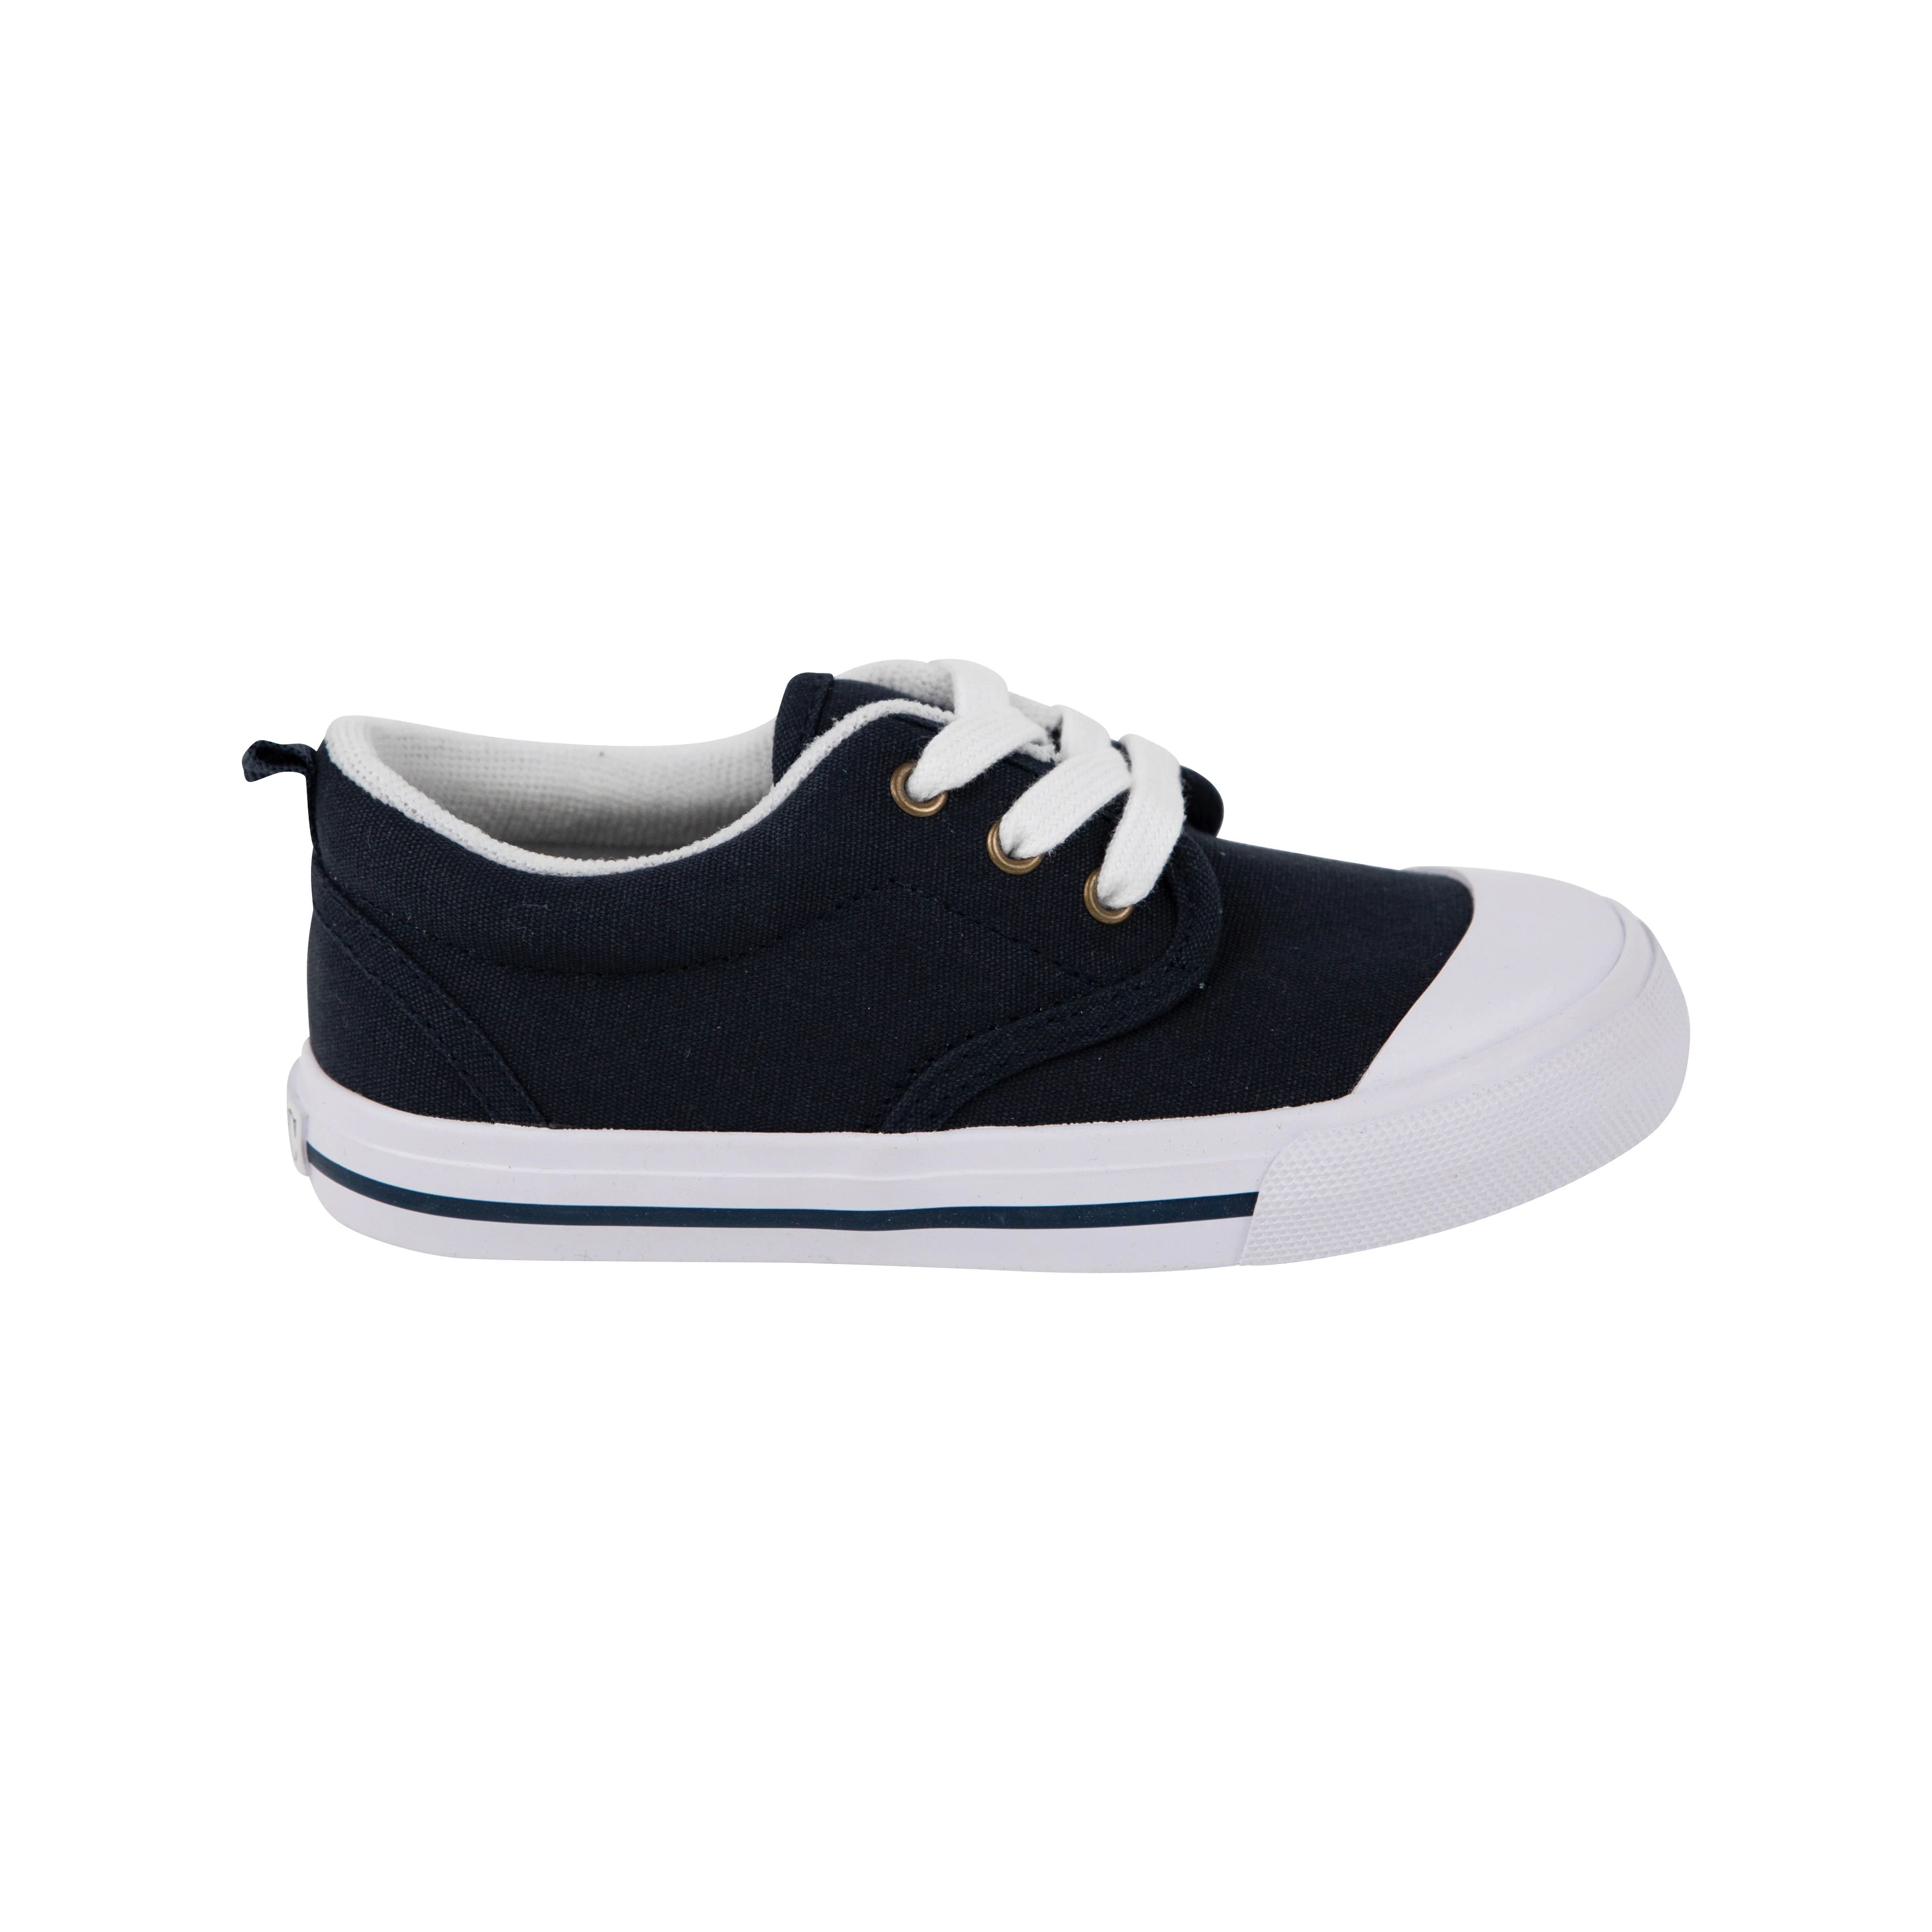 Prep Step Sneakers - Nantucket Navy with Nantucket Navy Stripe | The Beaufort Bonnet Company